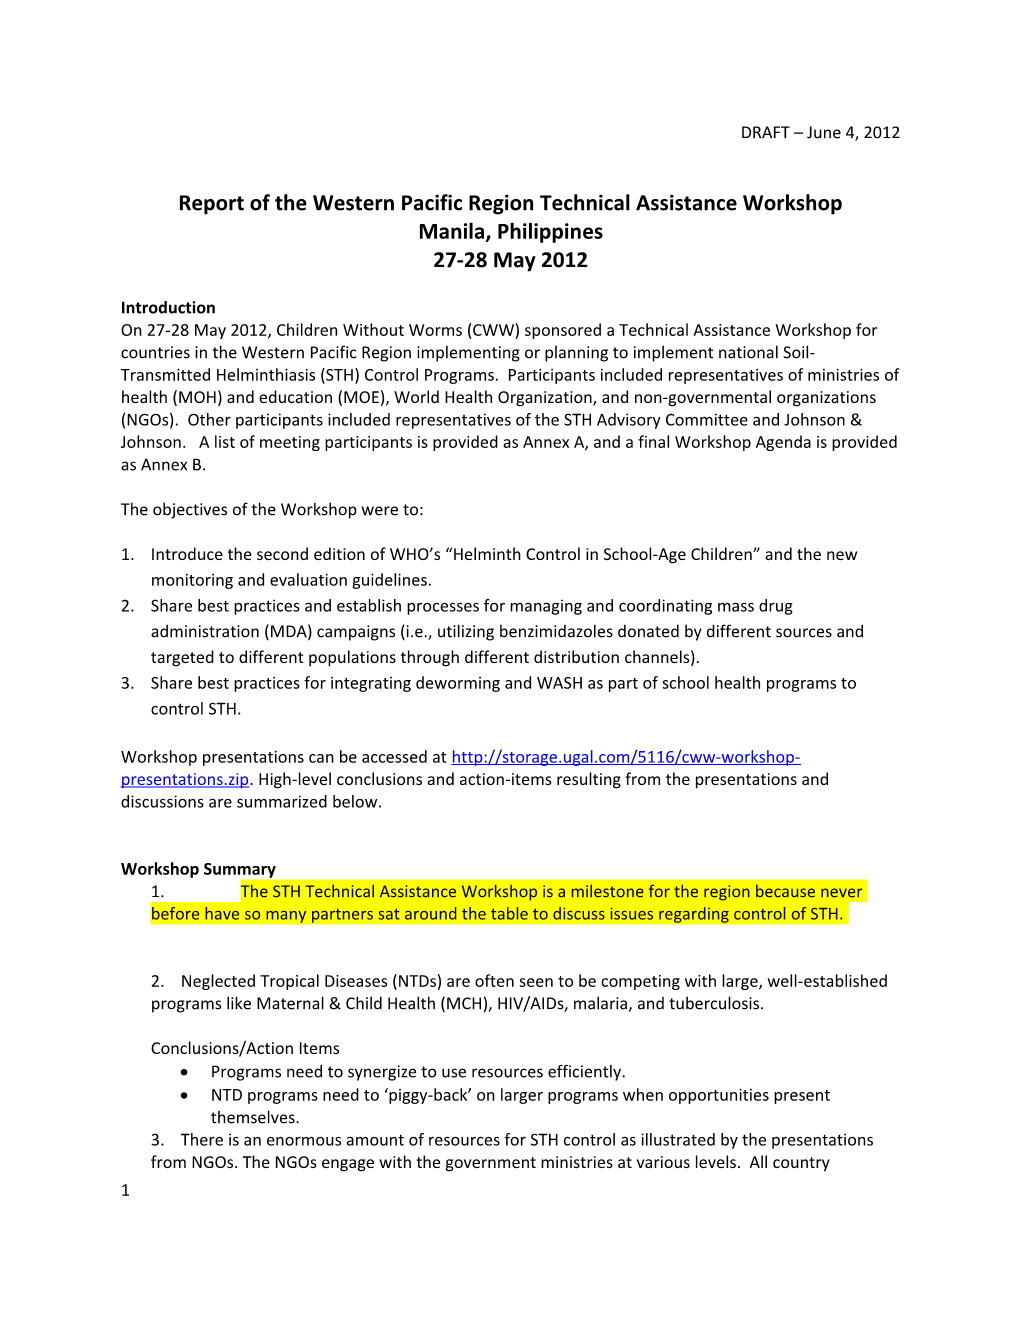 Report of the Western Pacific Region Technical Assistance Workshop